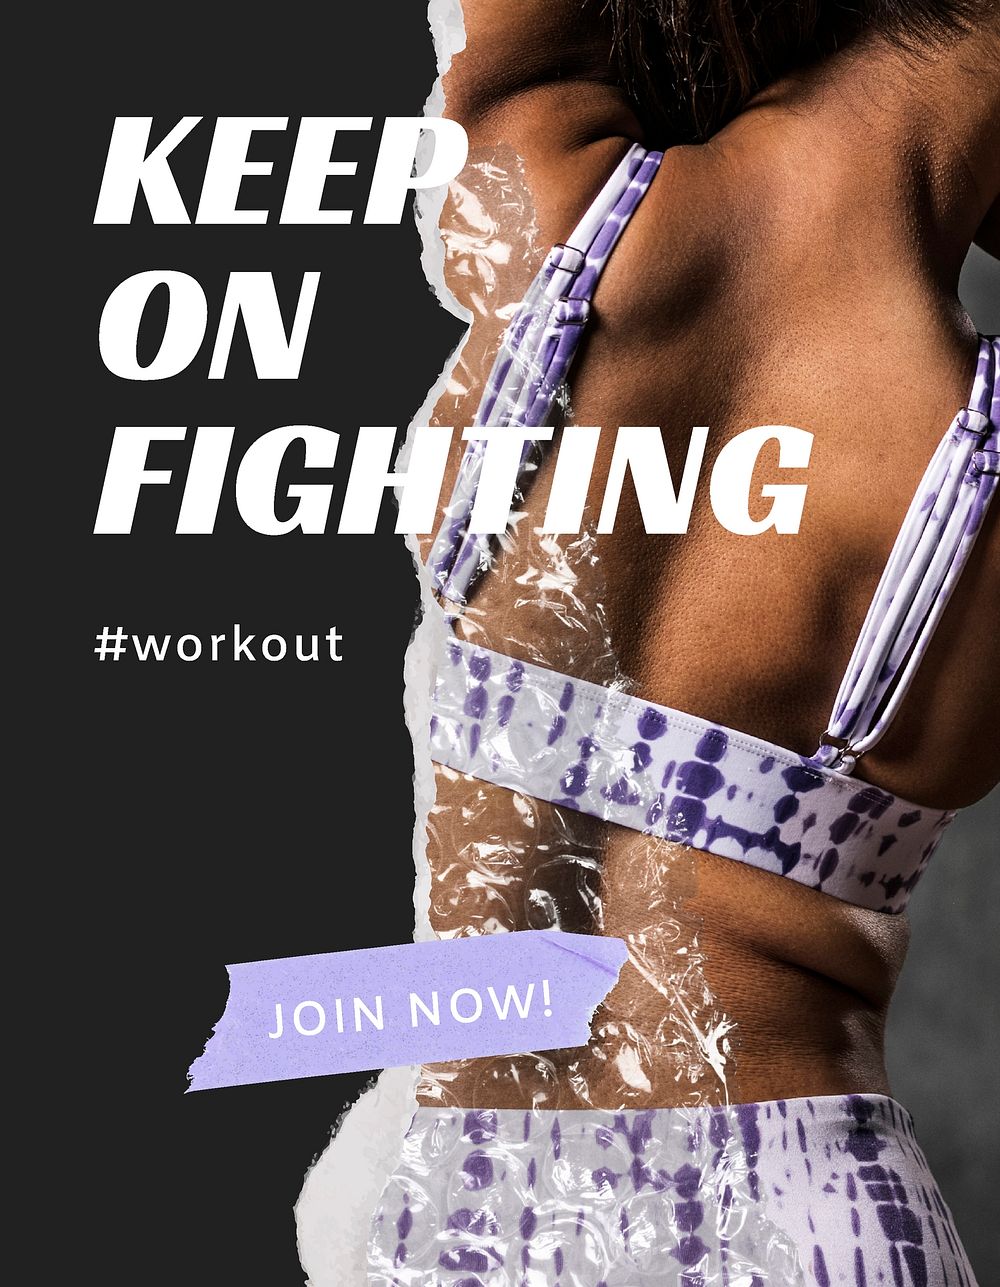 Workout aesthetic flyer template, gym advertisement vector